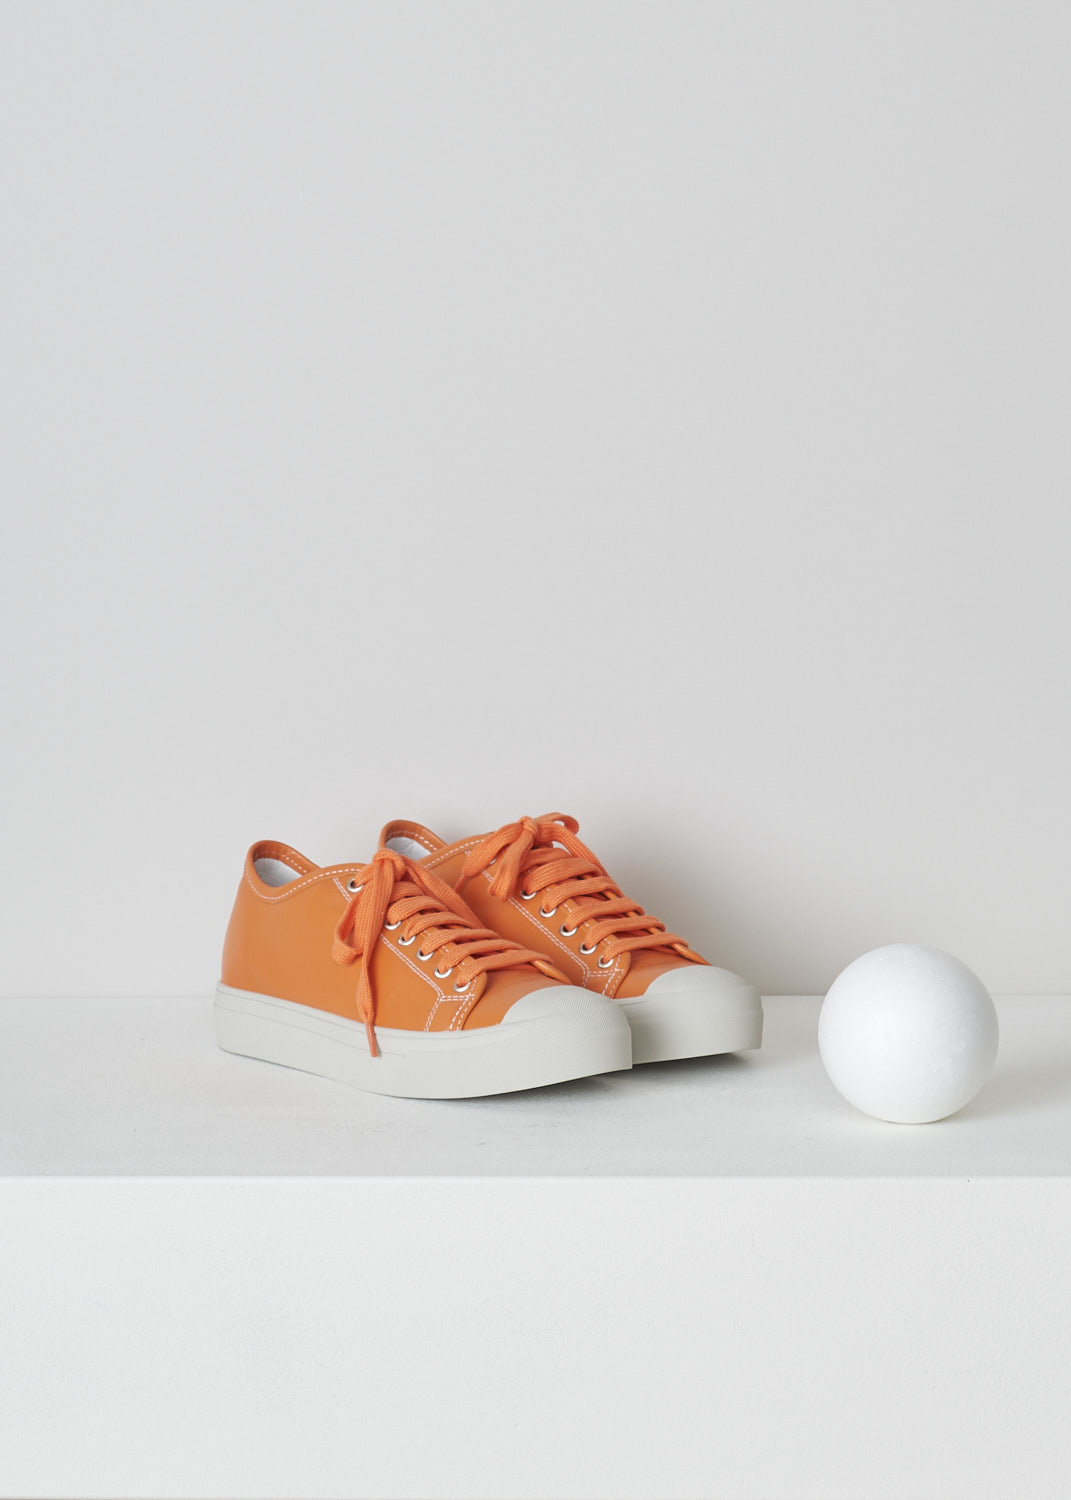 SOFIE Dâ€™HOORE, ORANGE LEATHER SHOES, FOLK_LMAST_LMAST_ORANGE, Orange, Front, These orange leather sneakers feature a front lace-up closure with orange laces. These sneakers have a round toe with a white rubber toe cap that goes down into the white rubber sole. Contrasting white stitching is used throughout. The sneakers come with an additional pair of white laces.
